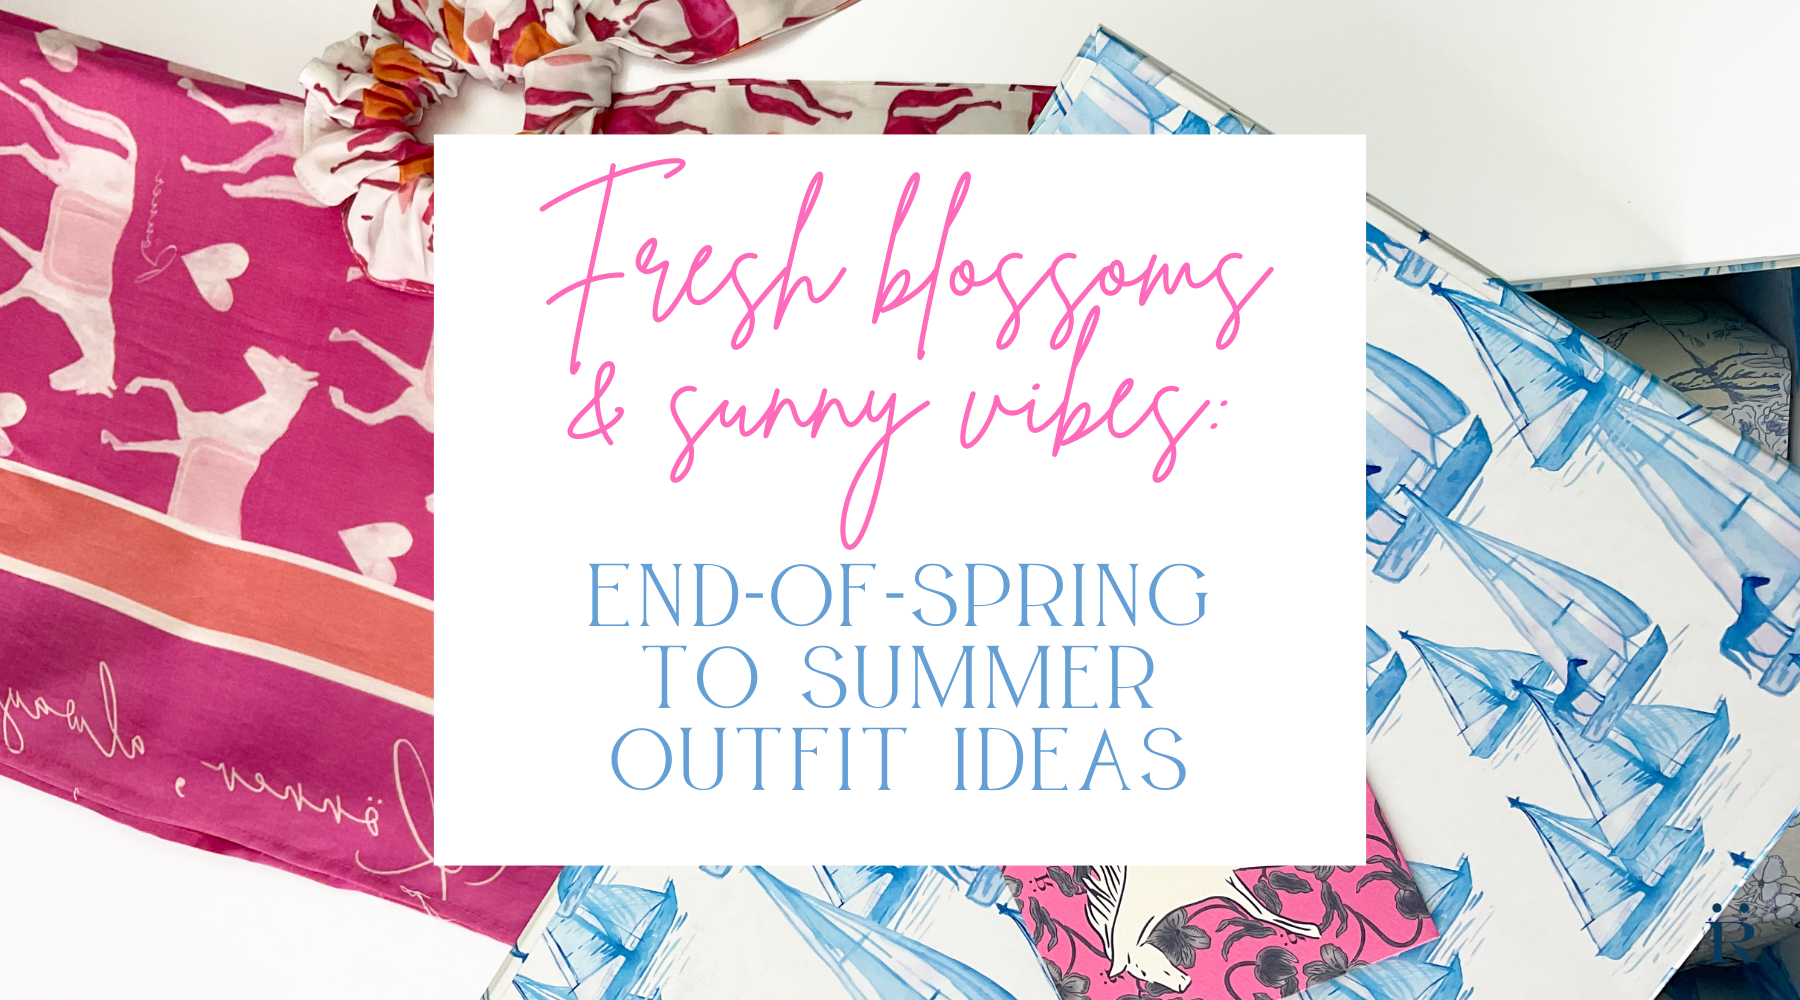 Embrace the joy of sunny rides: End-of-Spring to Summer Outfit Ideas